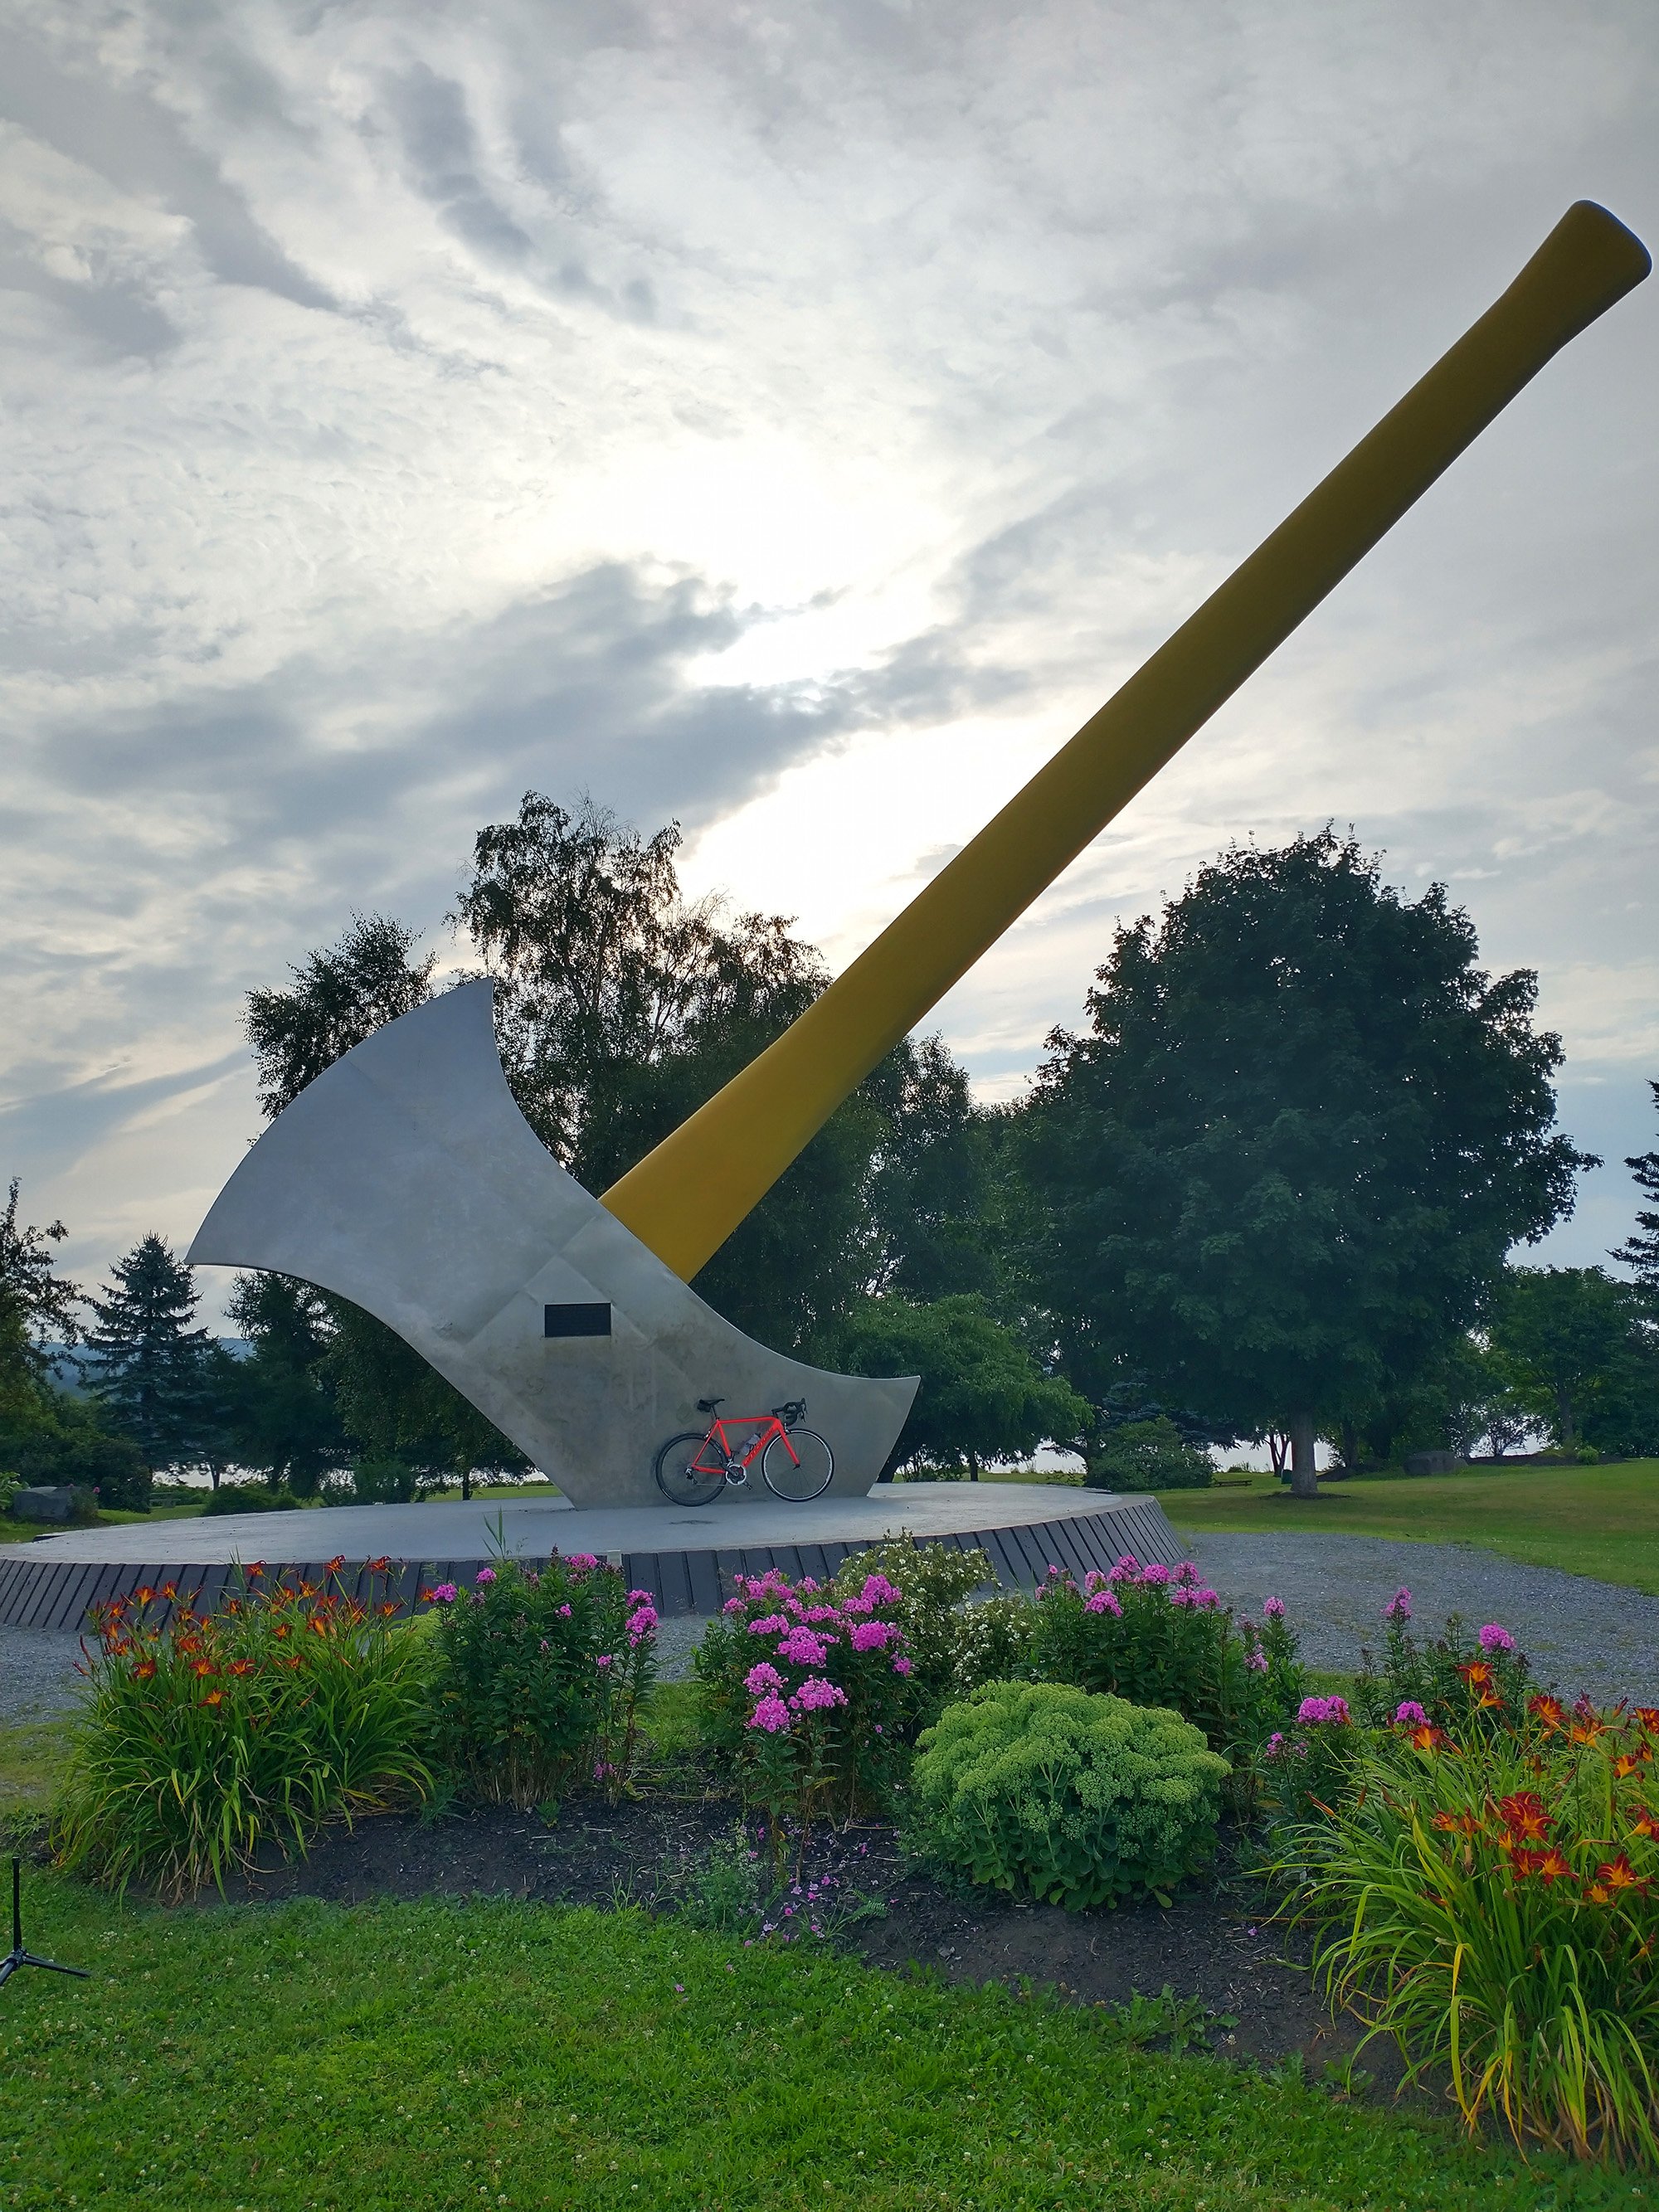 World's Biggest Axe. It's huge and pretty popular. 40mins from Fredericton, NB.